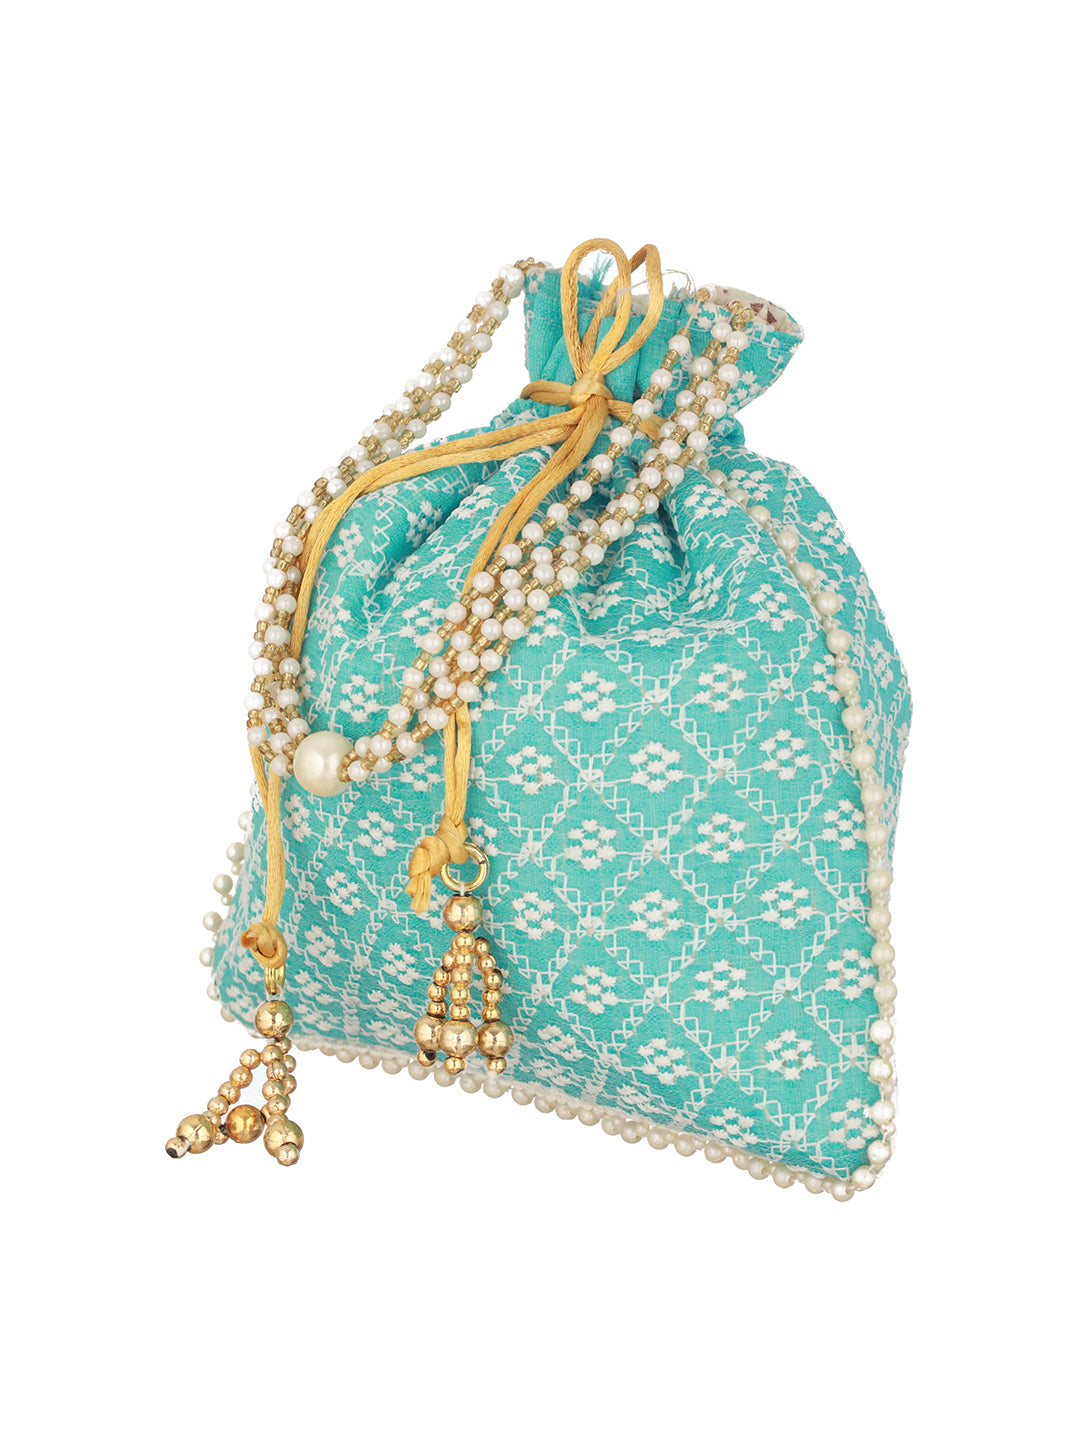 Turquoise Blue & Gold-Toned Chikan Embroidered work Potli Clutch - Jazzandsizzle